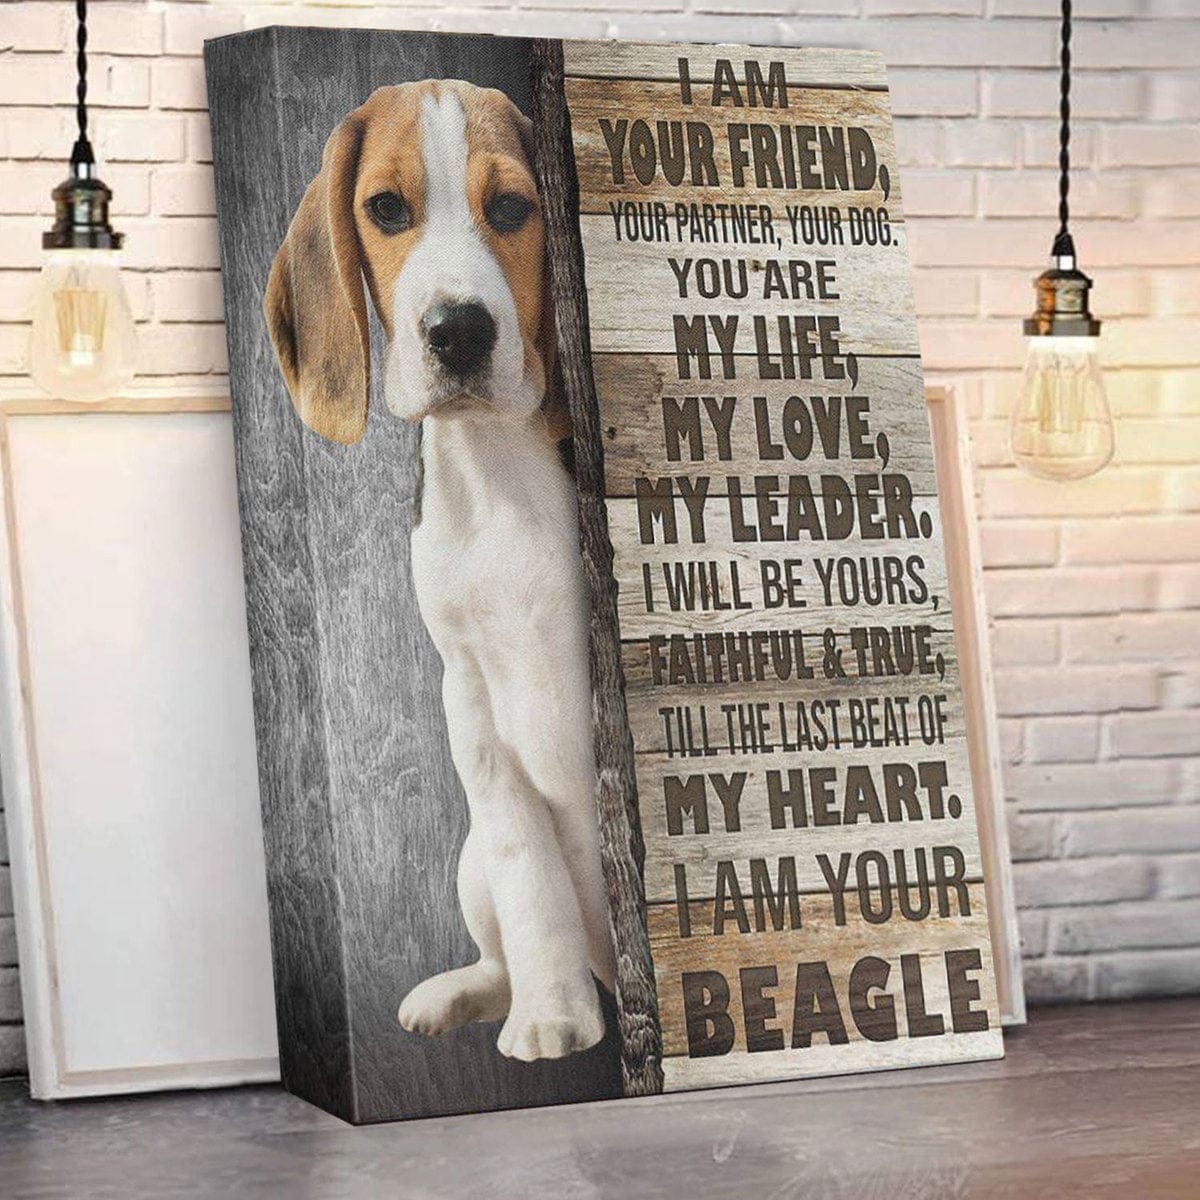 Beagle Poster, Beagle I Am Your Friend Your Partner Your Dog, Beagle Canvas Wall Print Art